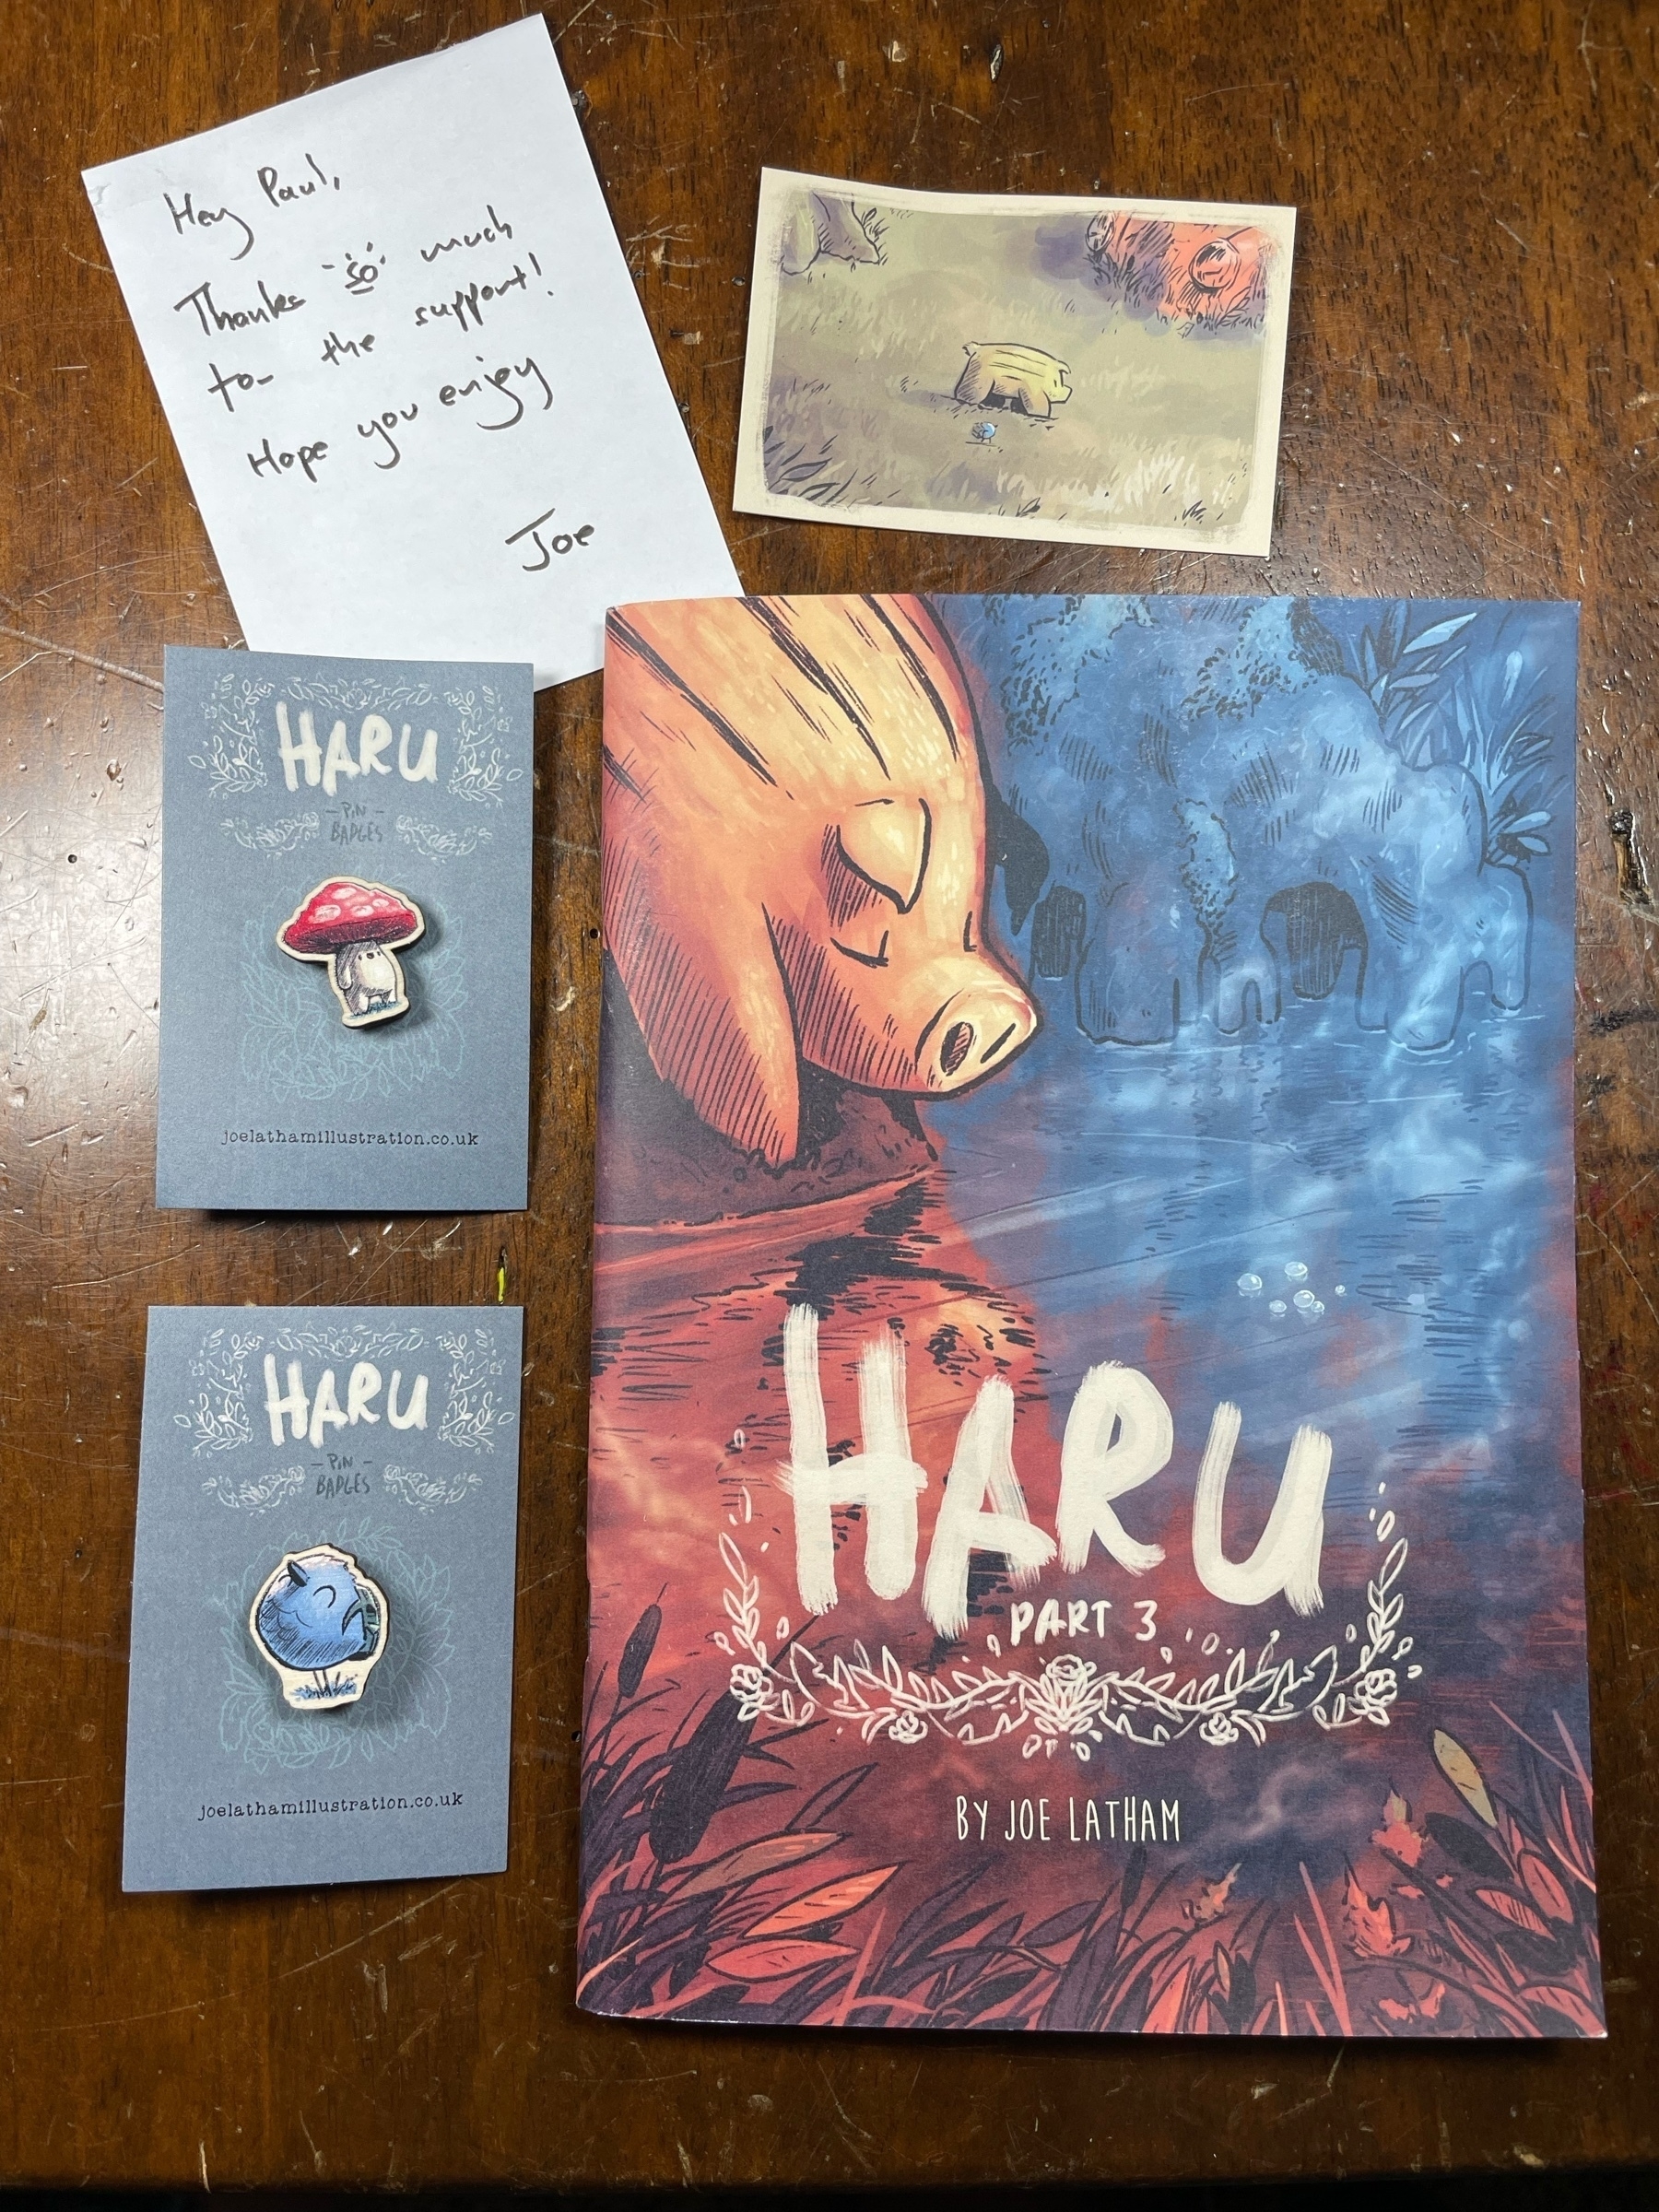 Issue 3 of Haru, two wooden character pins, a handwritten thank you note, and the backnof a business card depicting the character Yama